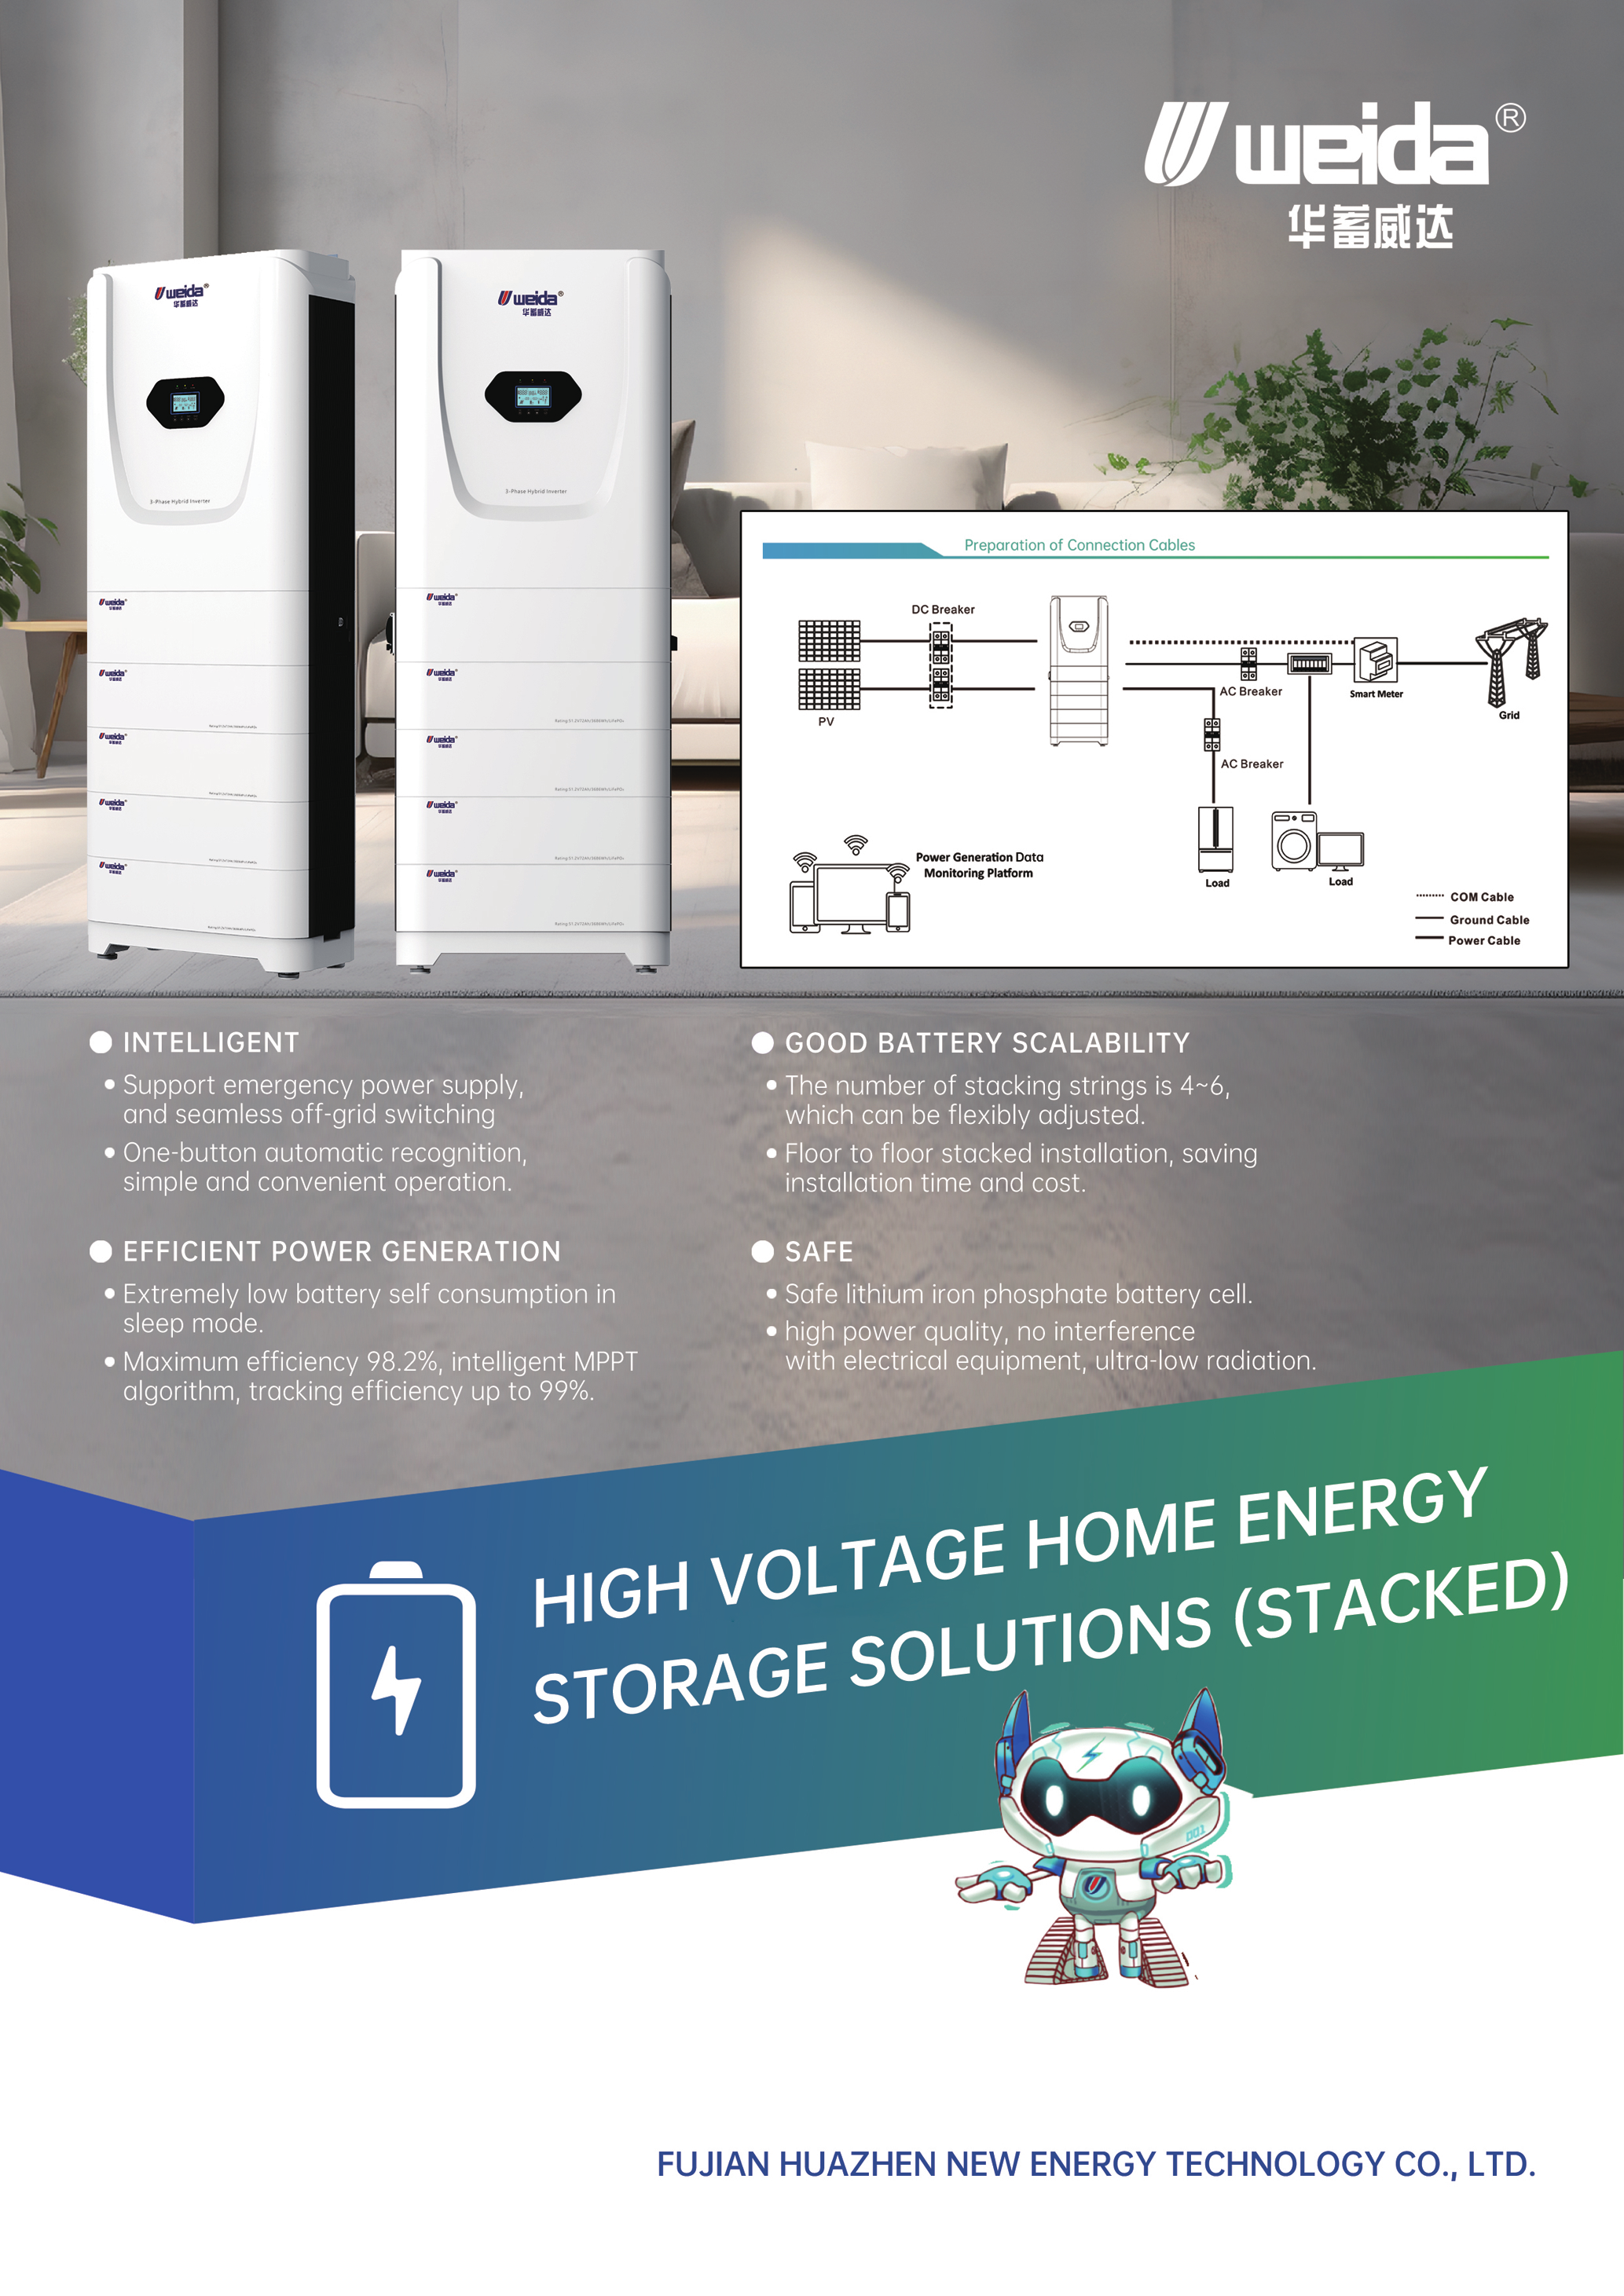 High Voltage Home Energy Storage Solution (Stacked)